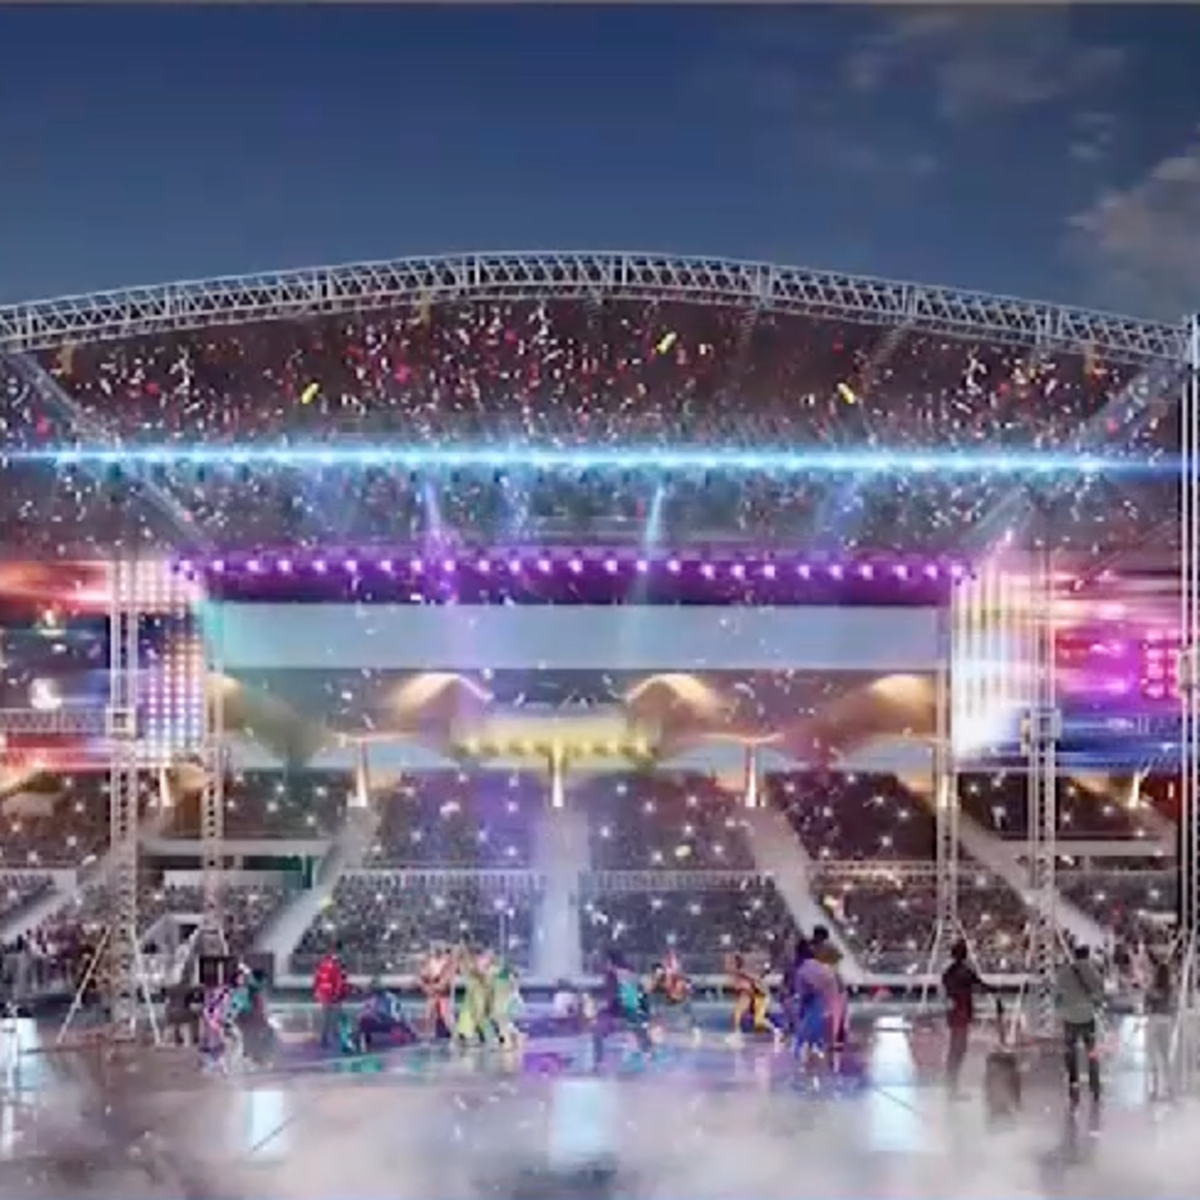 Renovation Plans Emerge for Miami Marine Stadium, a Potential Ultra Venue -   - The Latest Electronic Dance Music News, Reviews & Artists